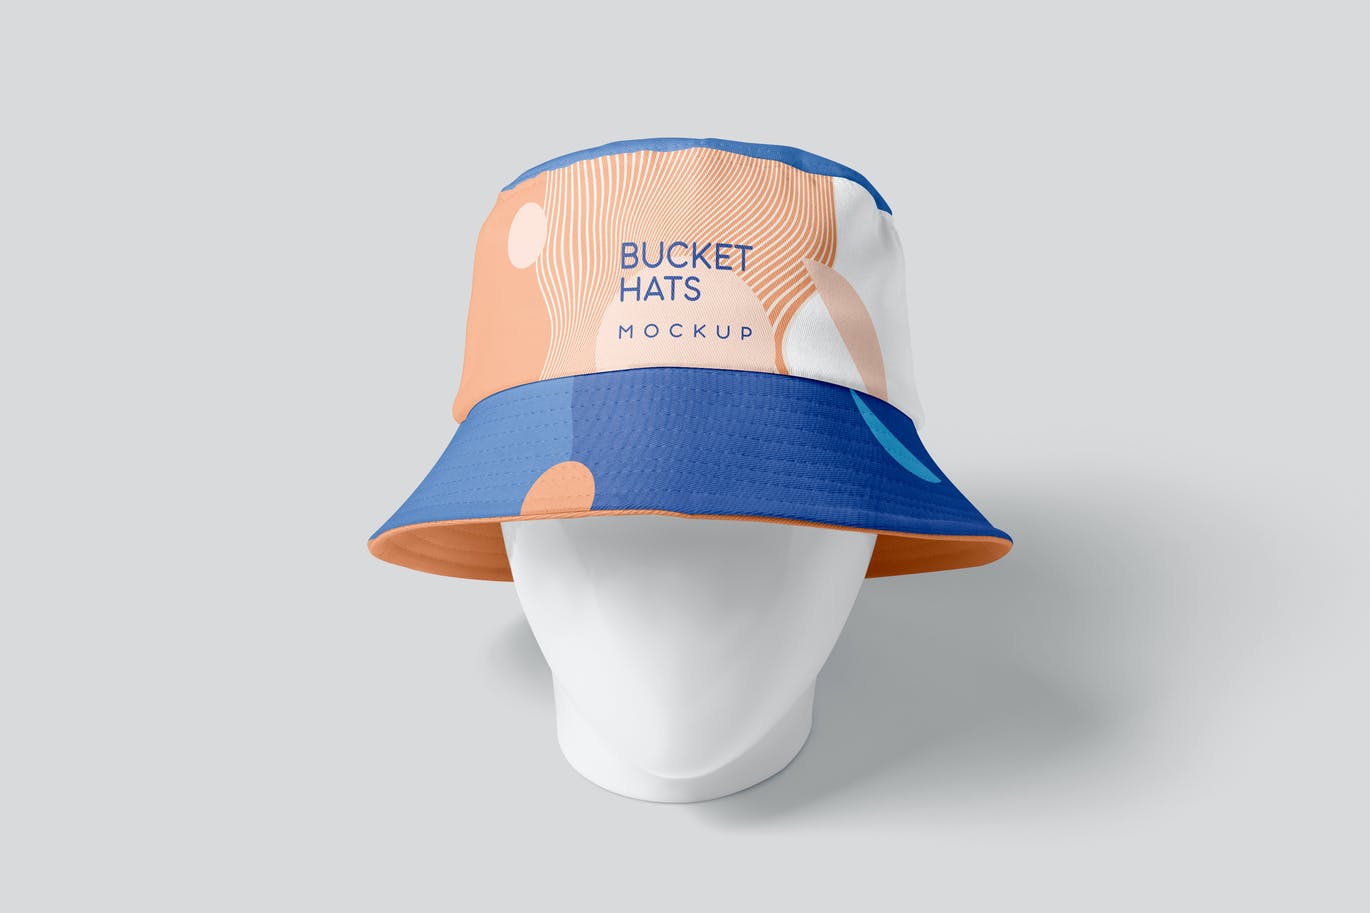 A bucket hat on mannequin head mockup